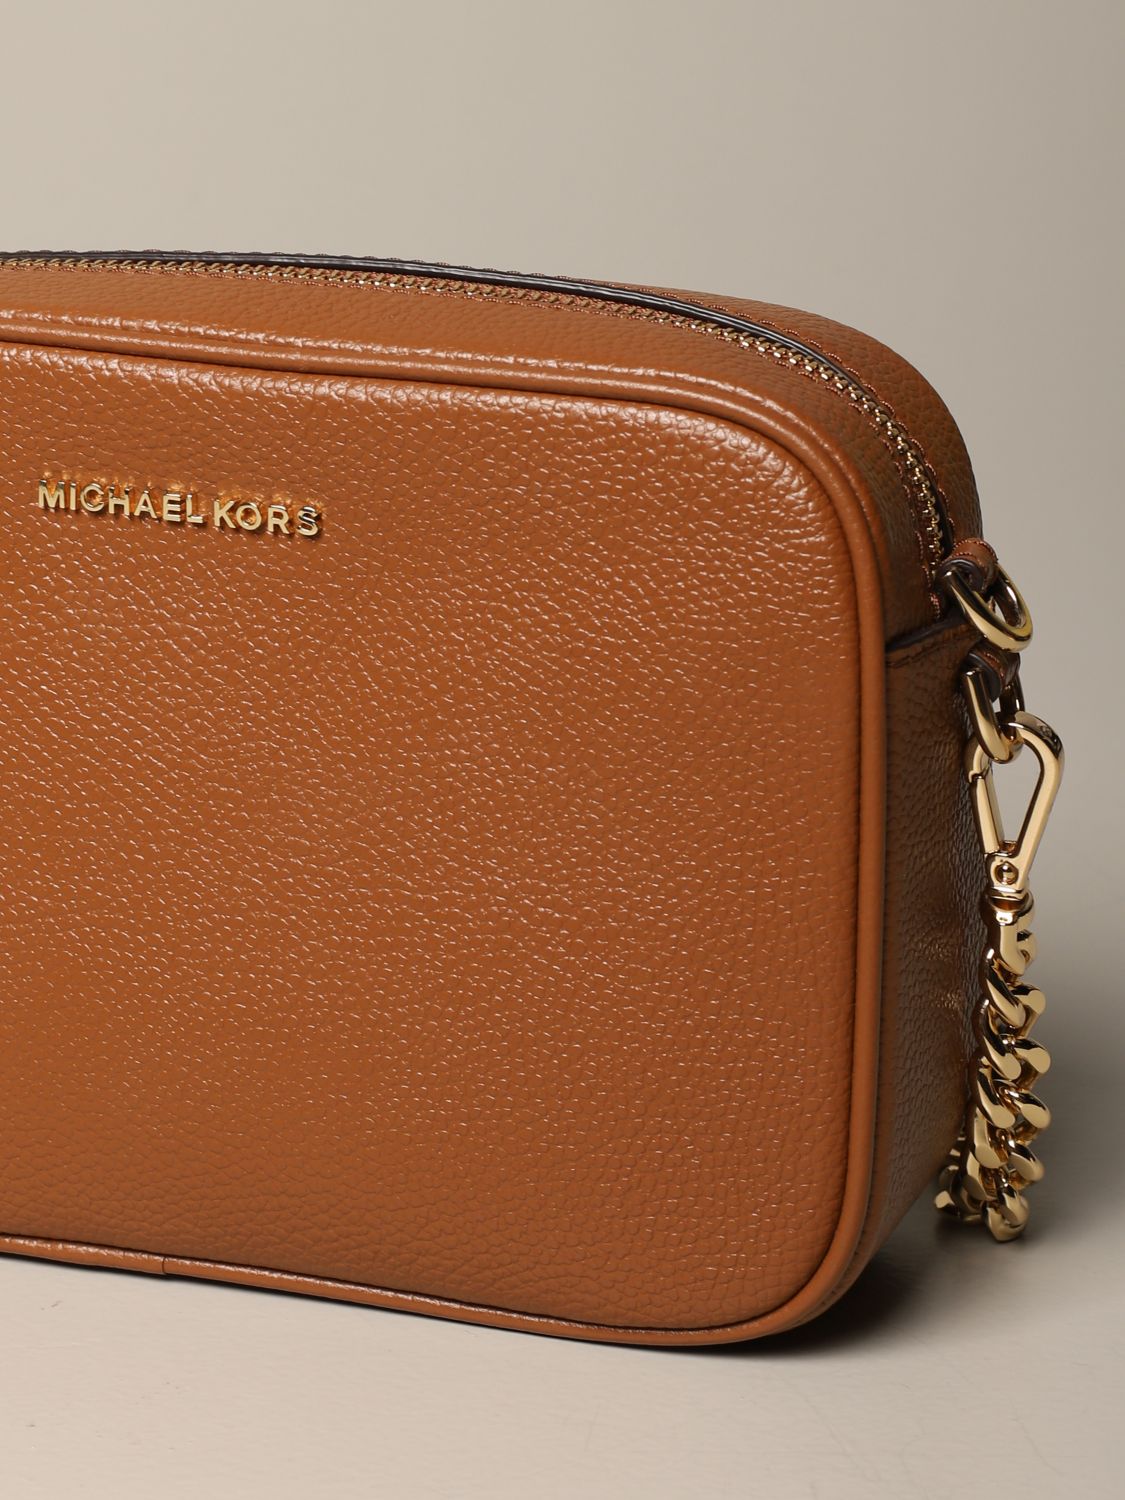 micheal kors leather